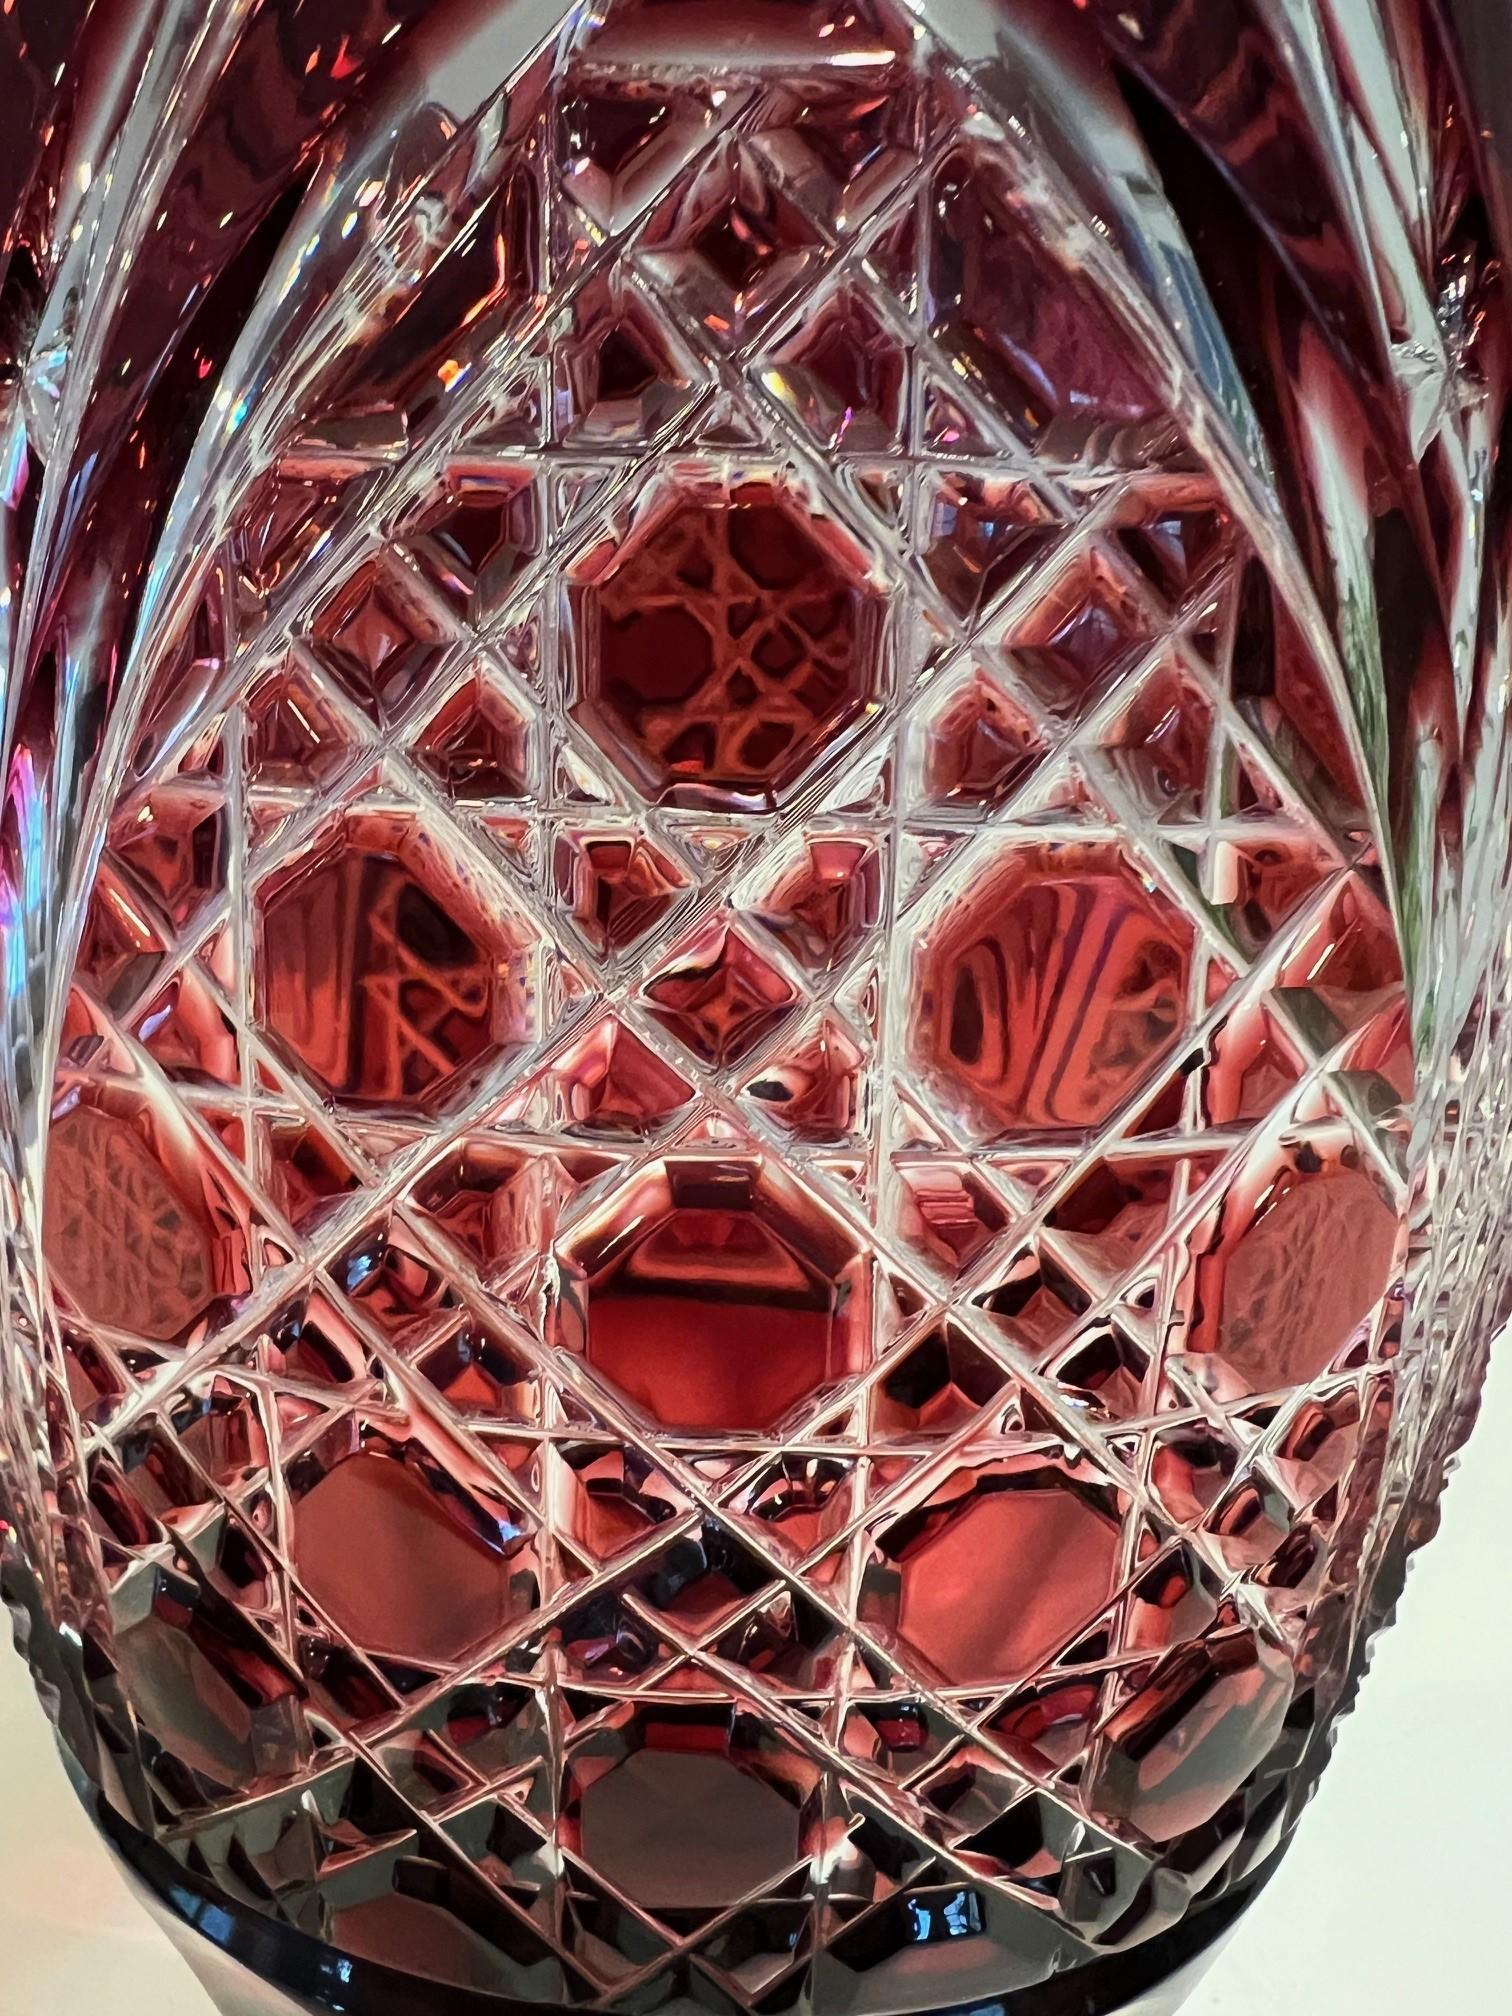 Red Hand Cut Lead Crystal Vase by Caesar Crystal Bohemiae Co. Czech Republic In Excellent Condition For Sale In Stamford, CT